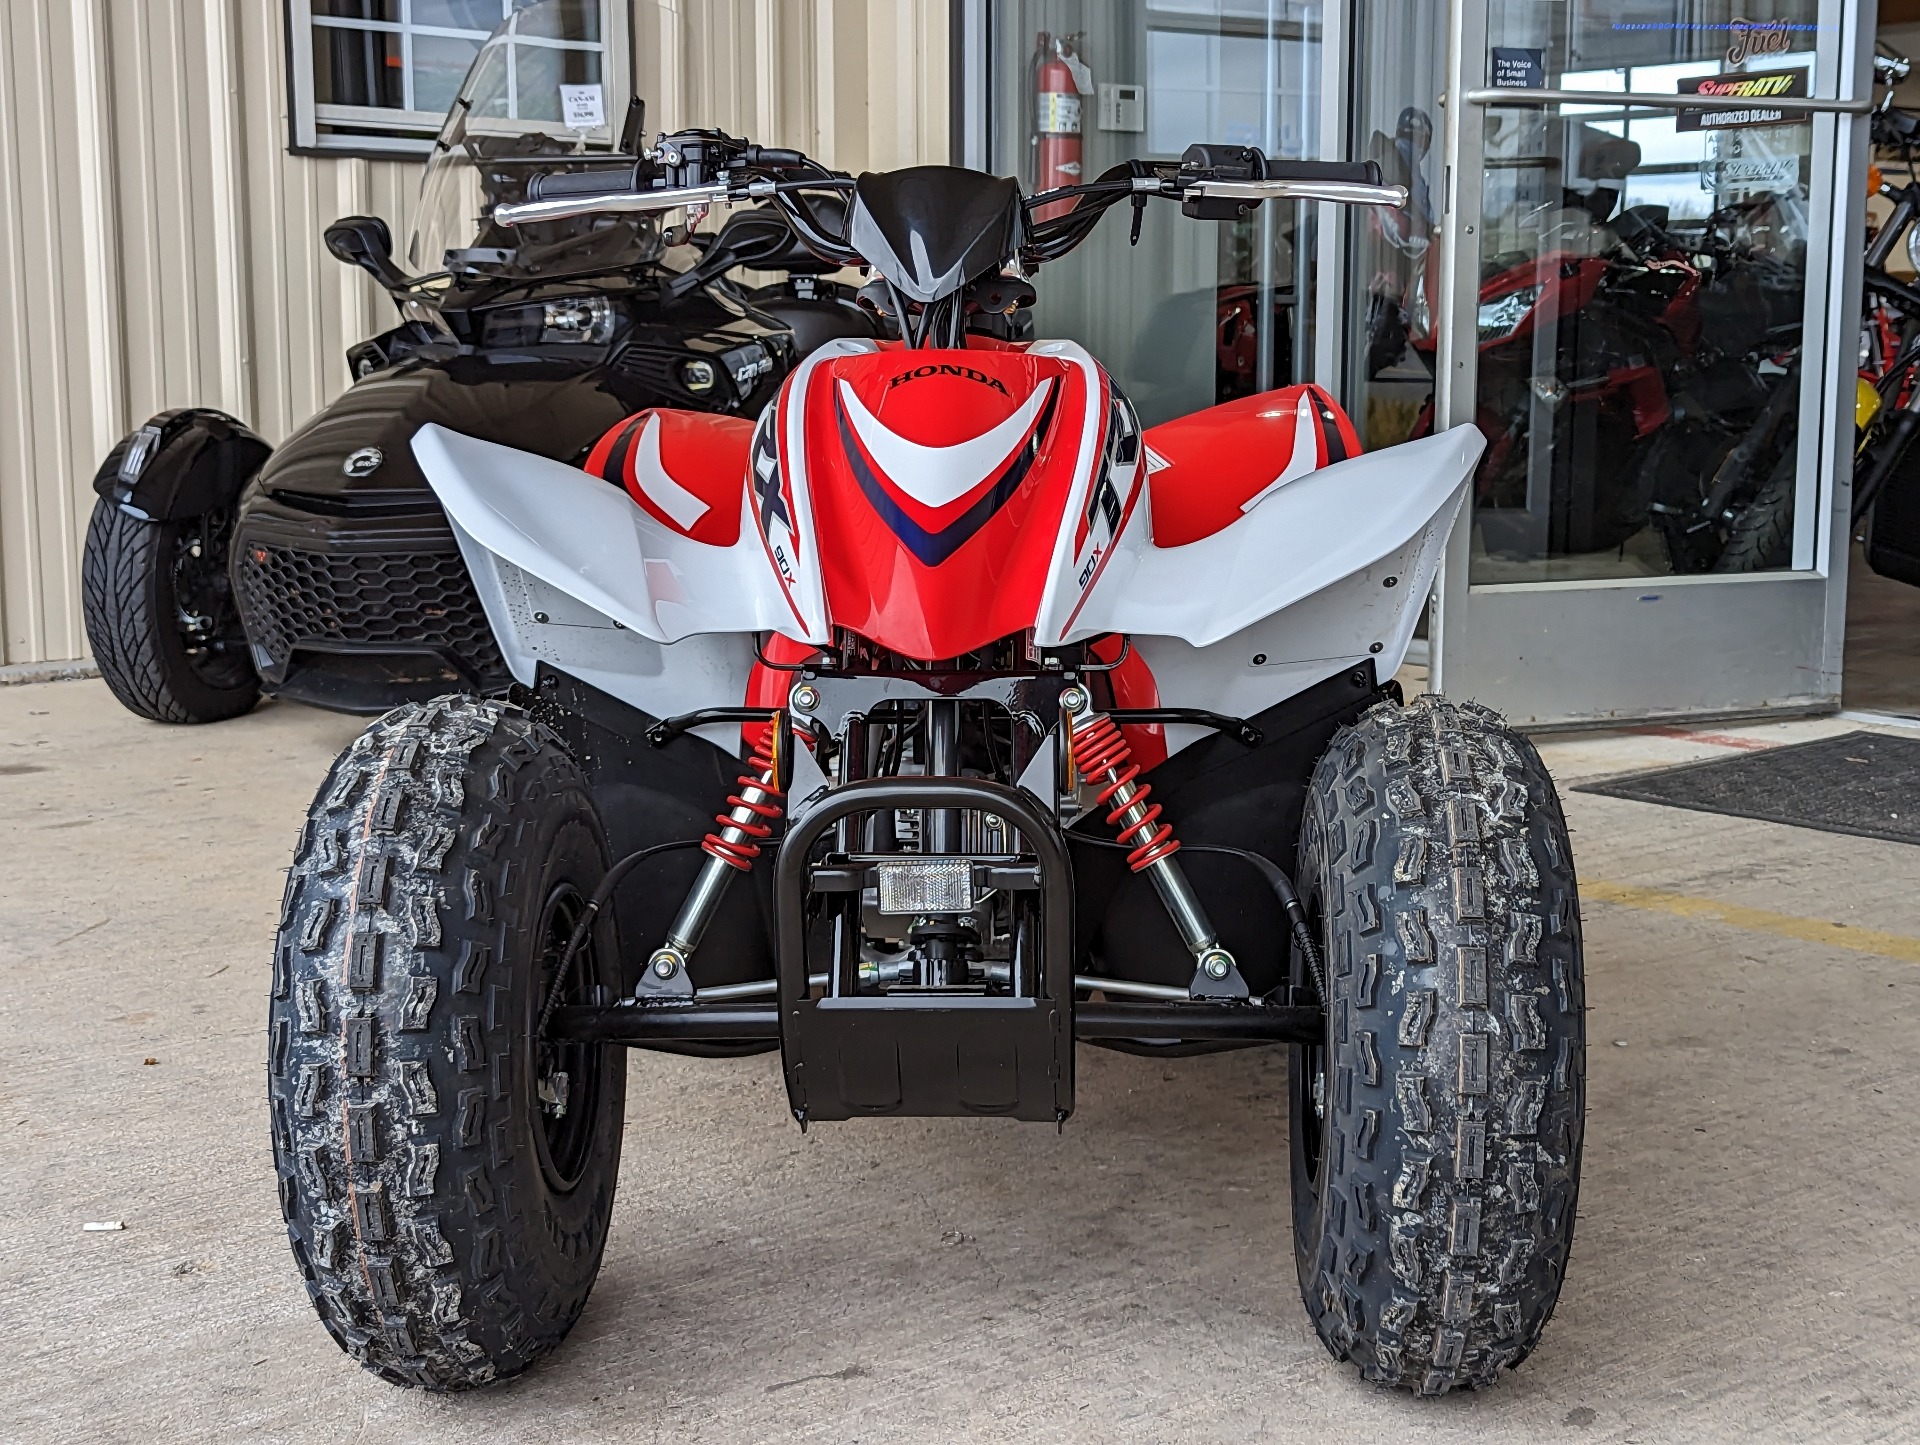 2023 Honda TRX90X in Winchester, Tennessee - Photo 4